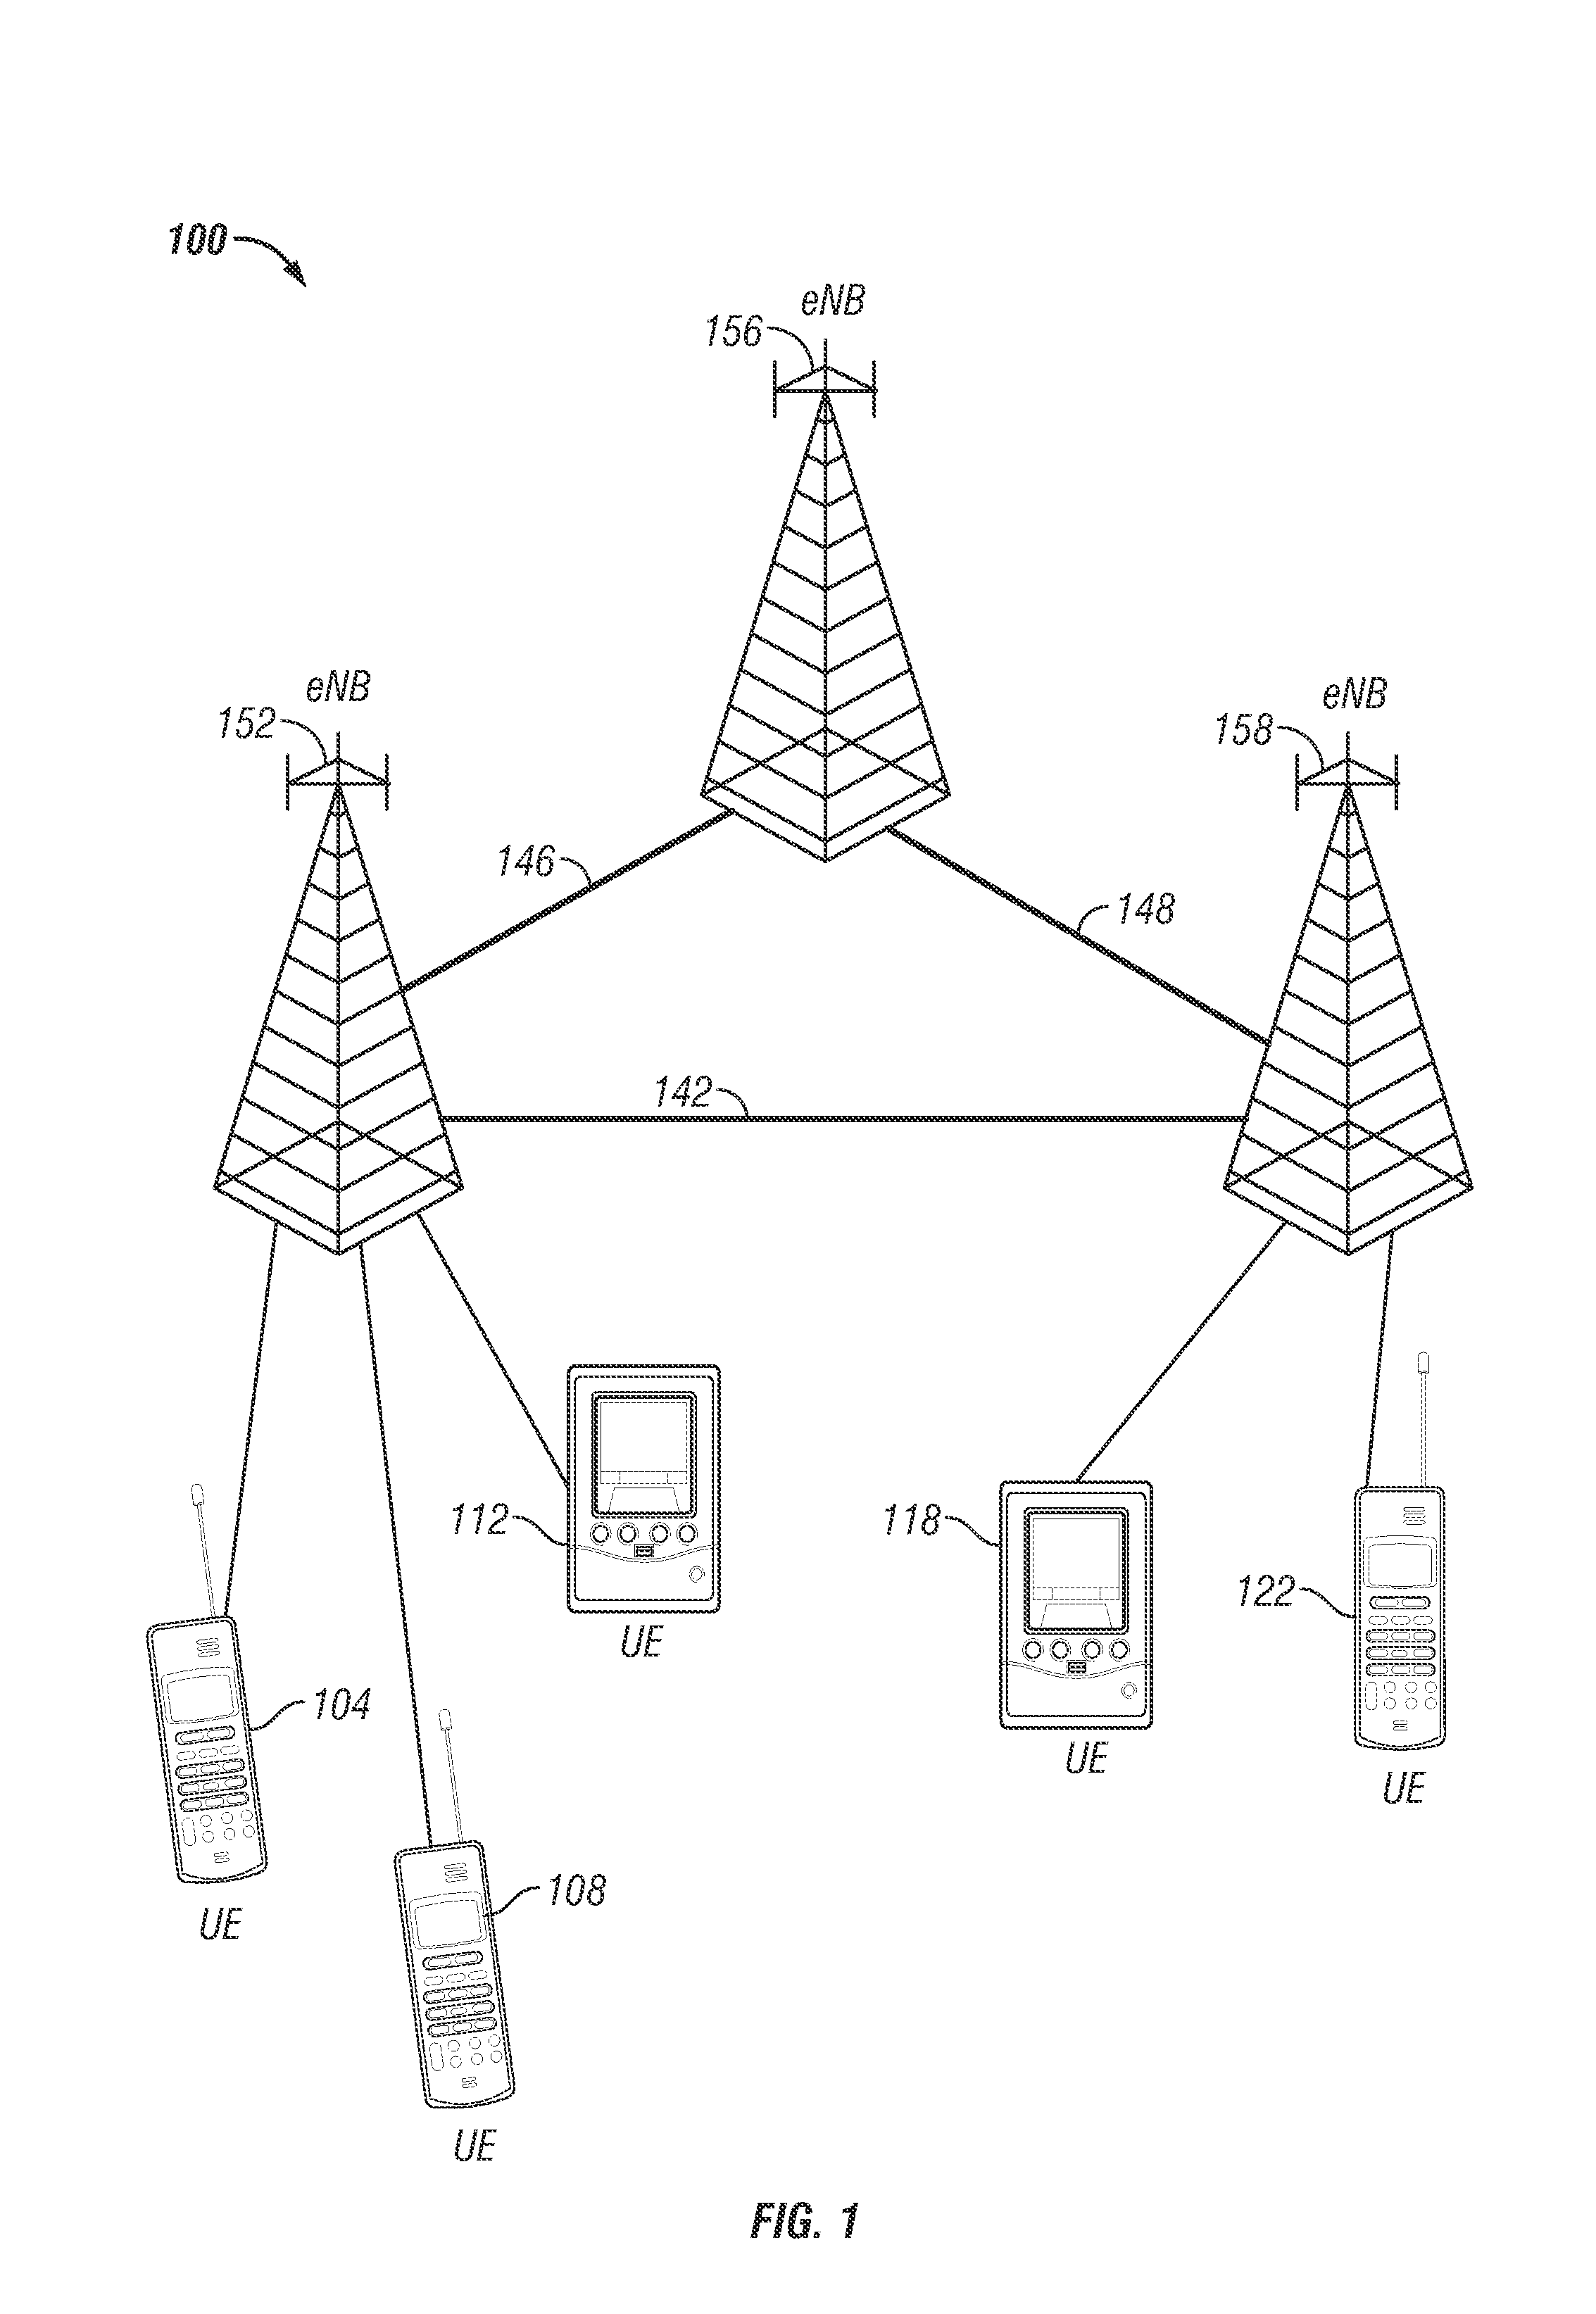 METHOD AND SYSTEM FOR CONTROL OF DISCONTINUOUS RECEPTION (DRX) BY A MOBILE DEVICE IN A WIRELESS COMMUNICATIONS NETWORK SUPPORTING VOICE-OVER-INTERNET-PROTOCOL (VoIP)